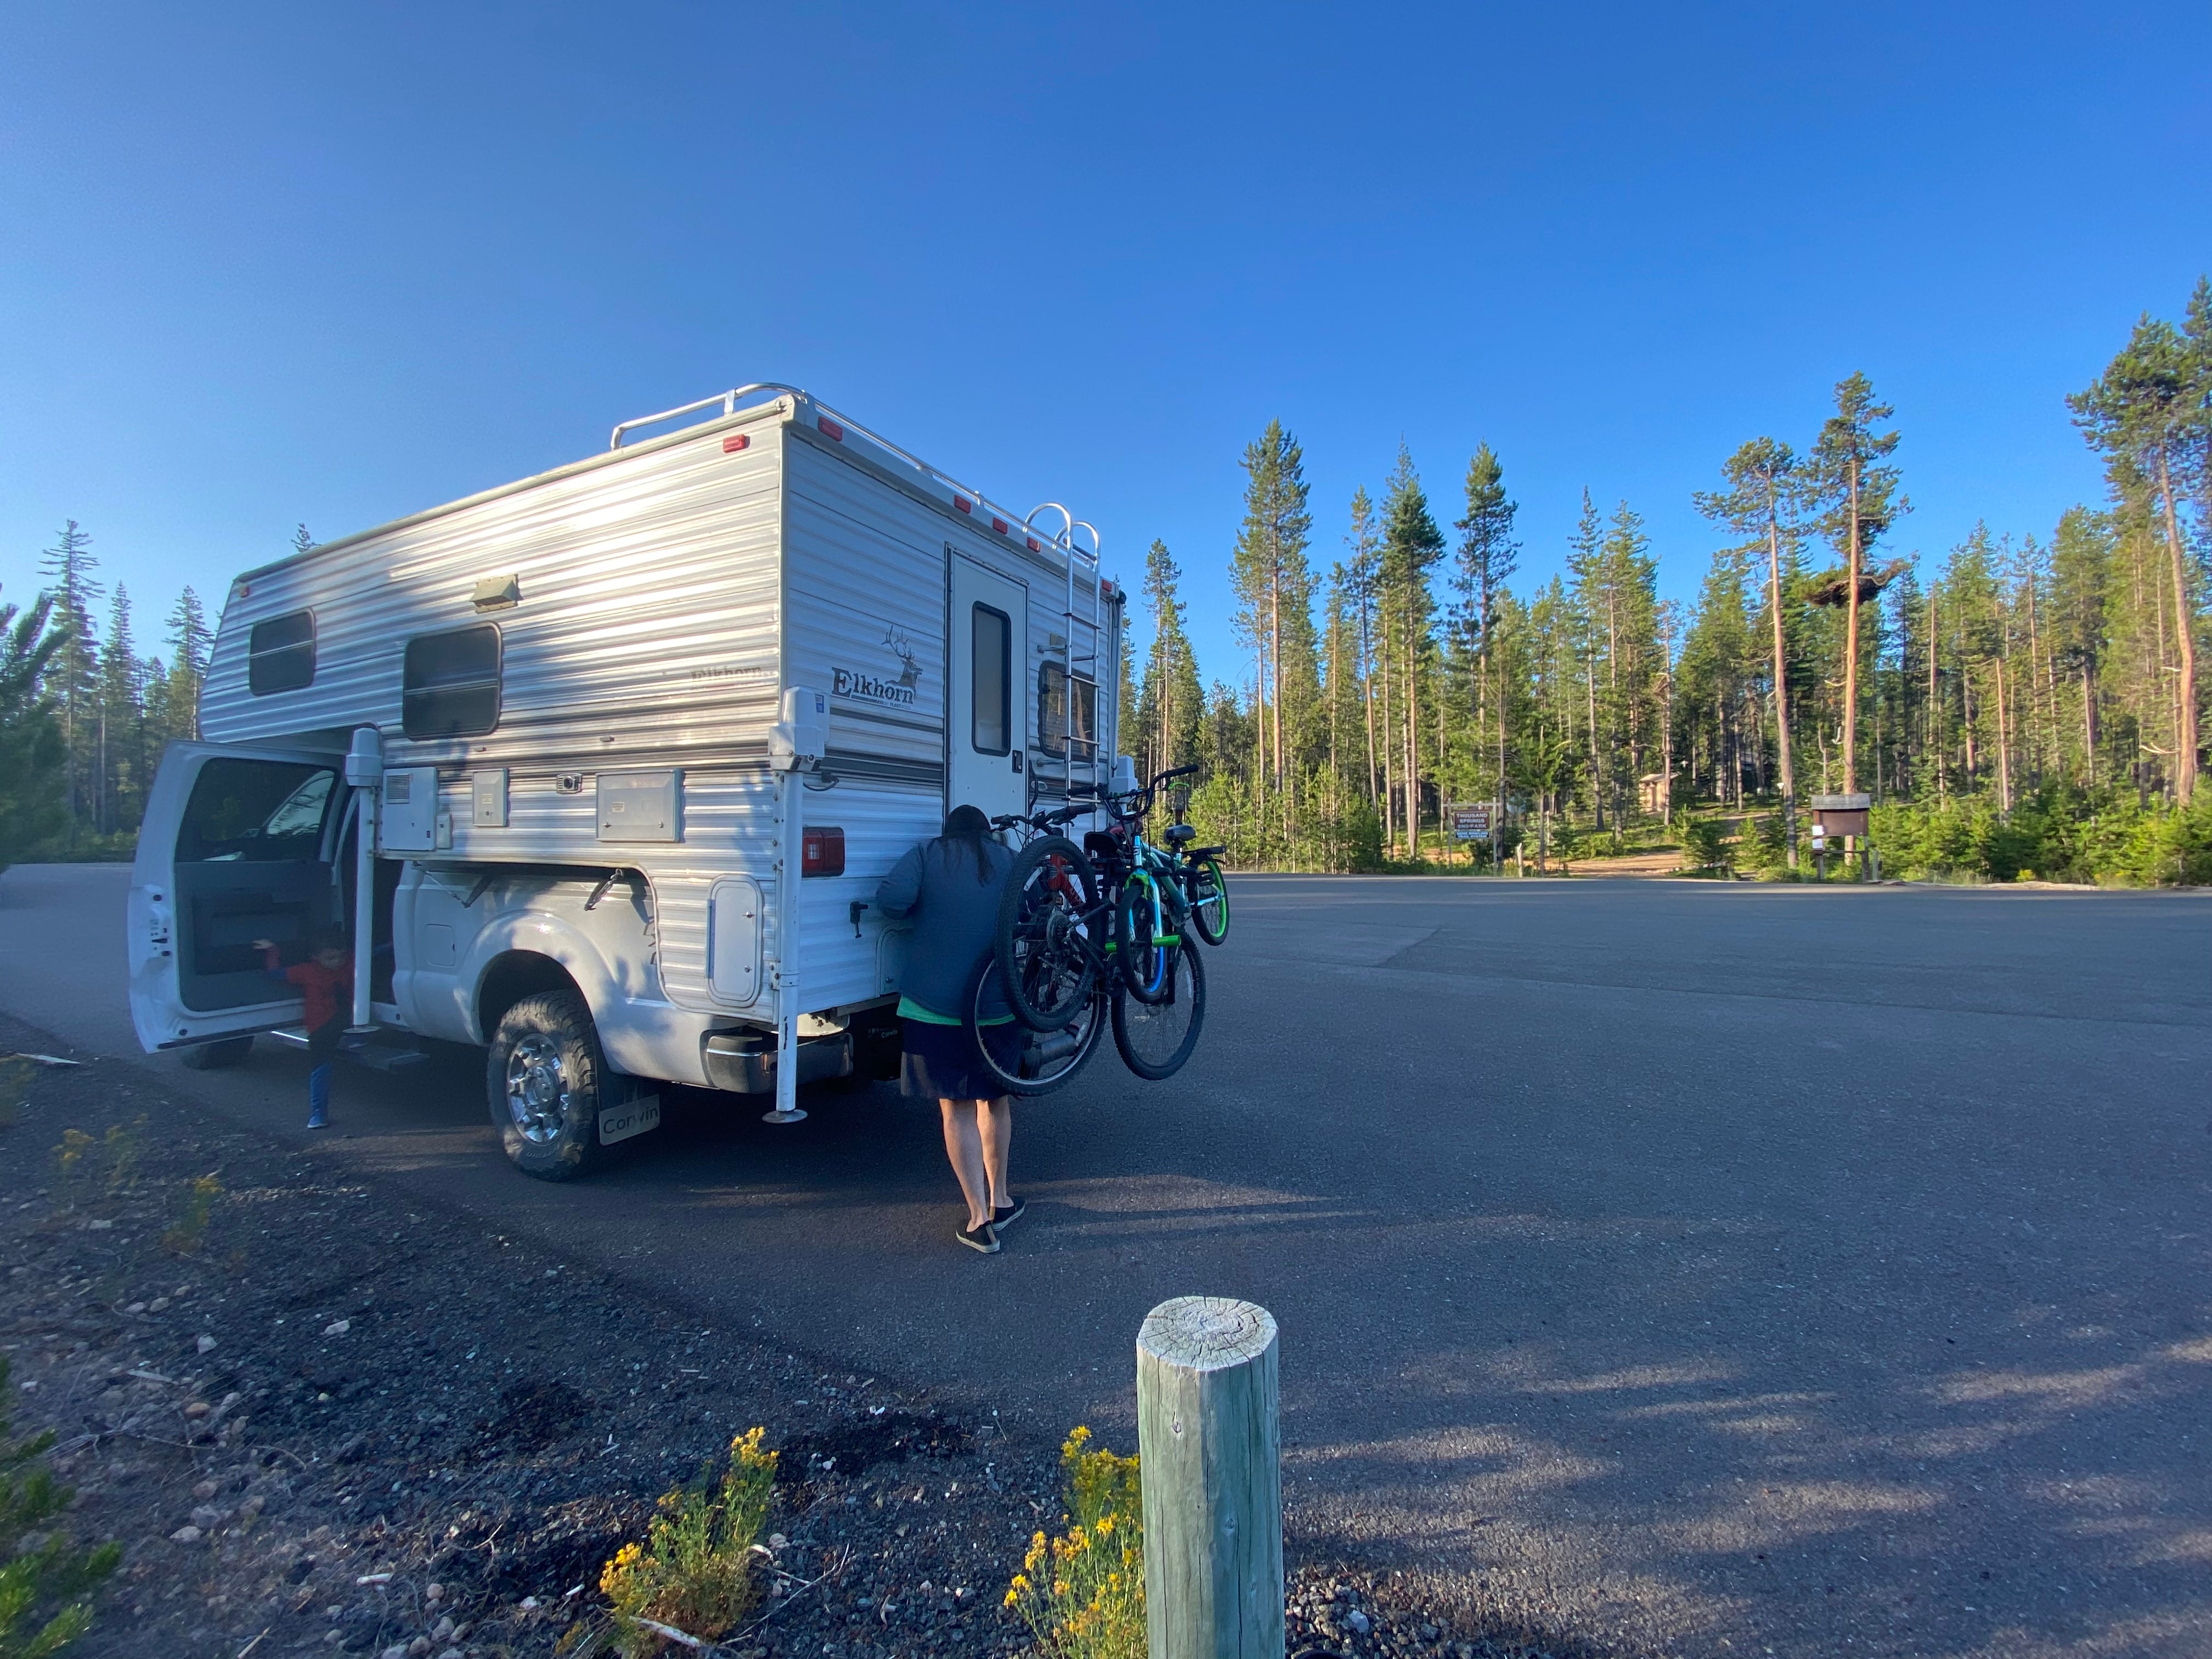 Camper submitted image from Thousand Springs Sno-Park - 1